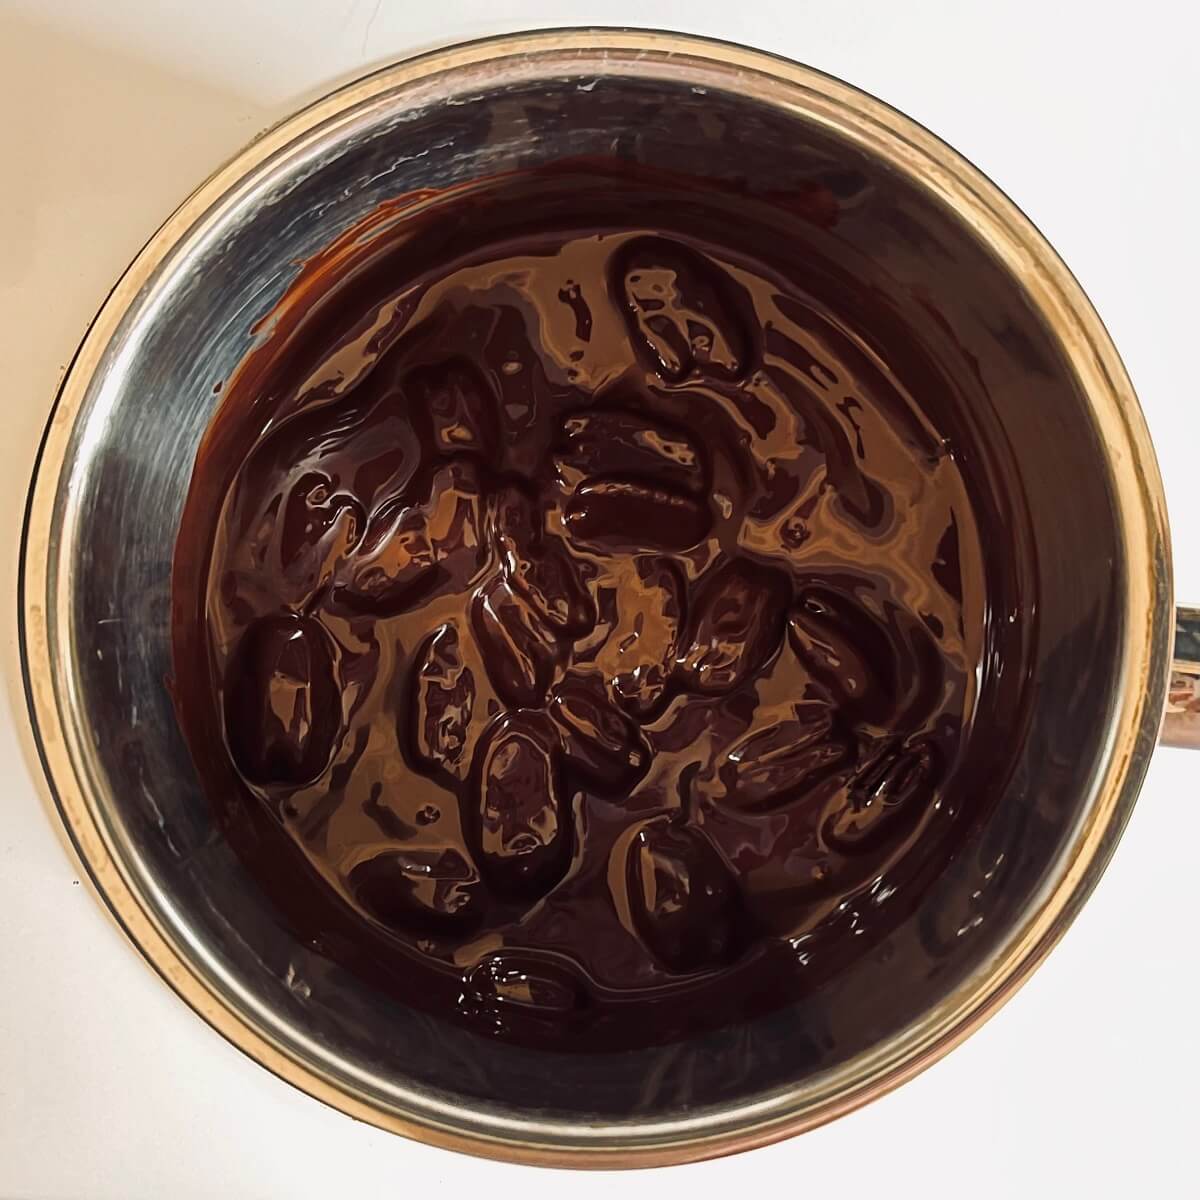 Melted dark chocolate and pecan halves in a metal pot.